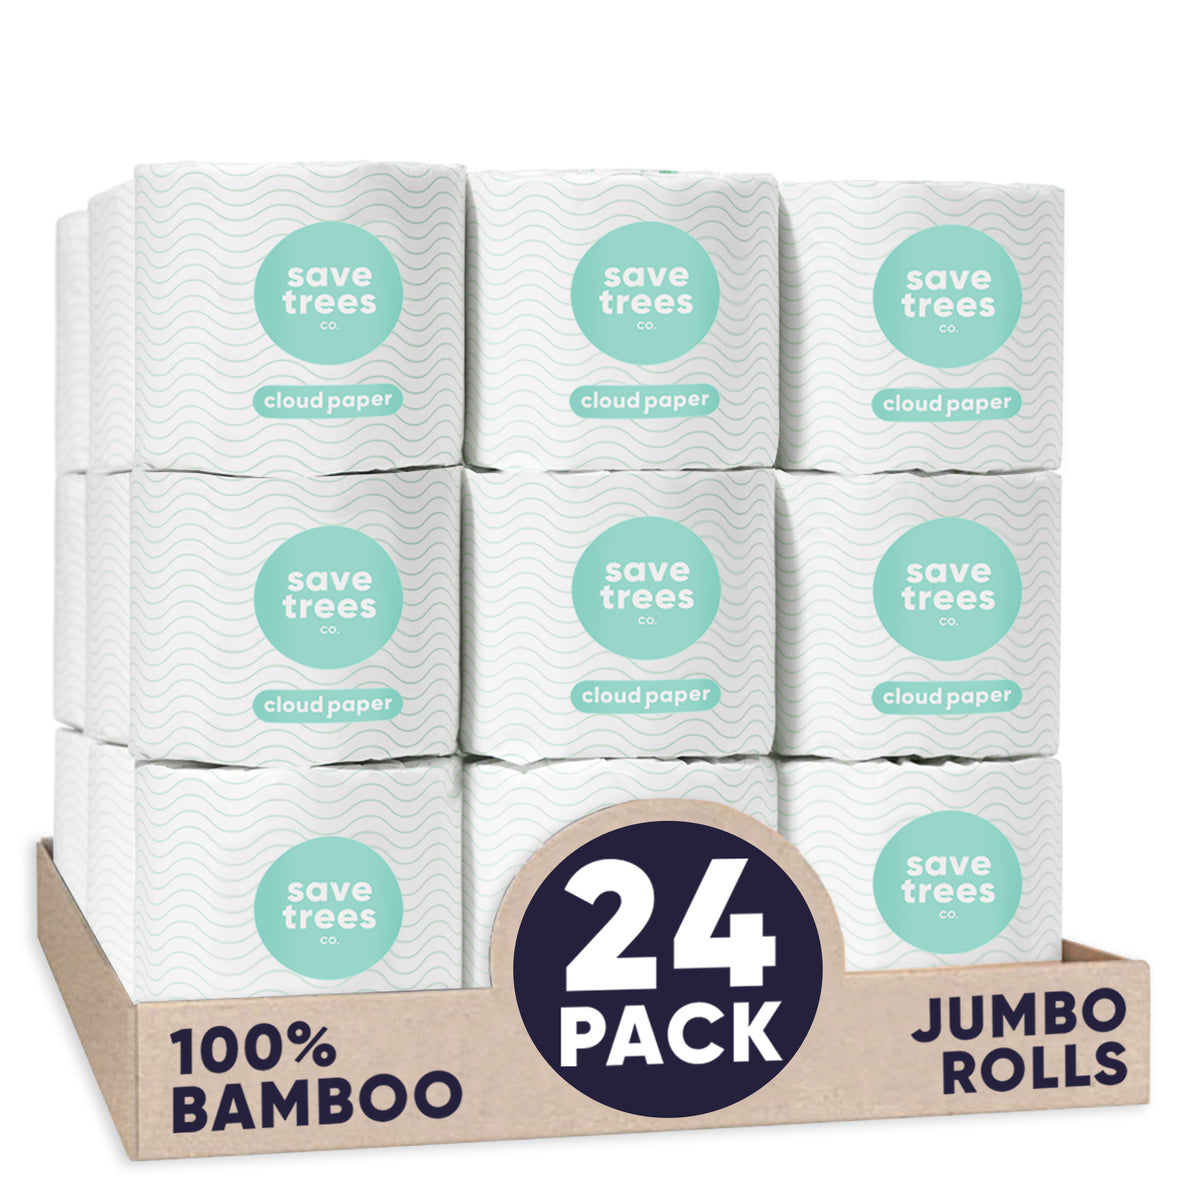 Sustainable Bamboo Toilet Paper 24 Pack - Eco-friendly - Life Supplies